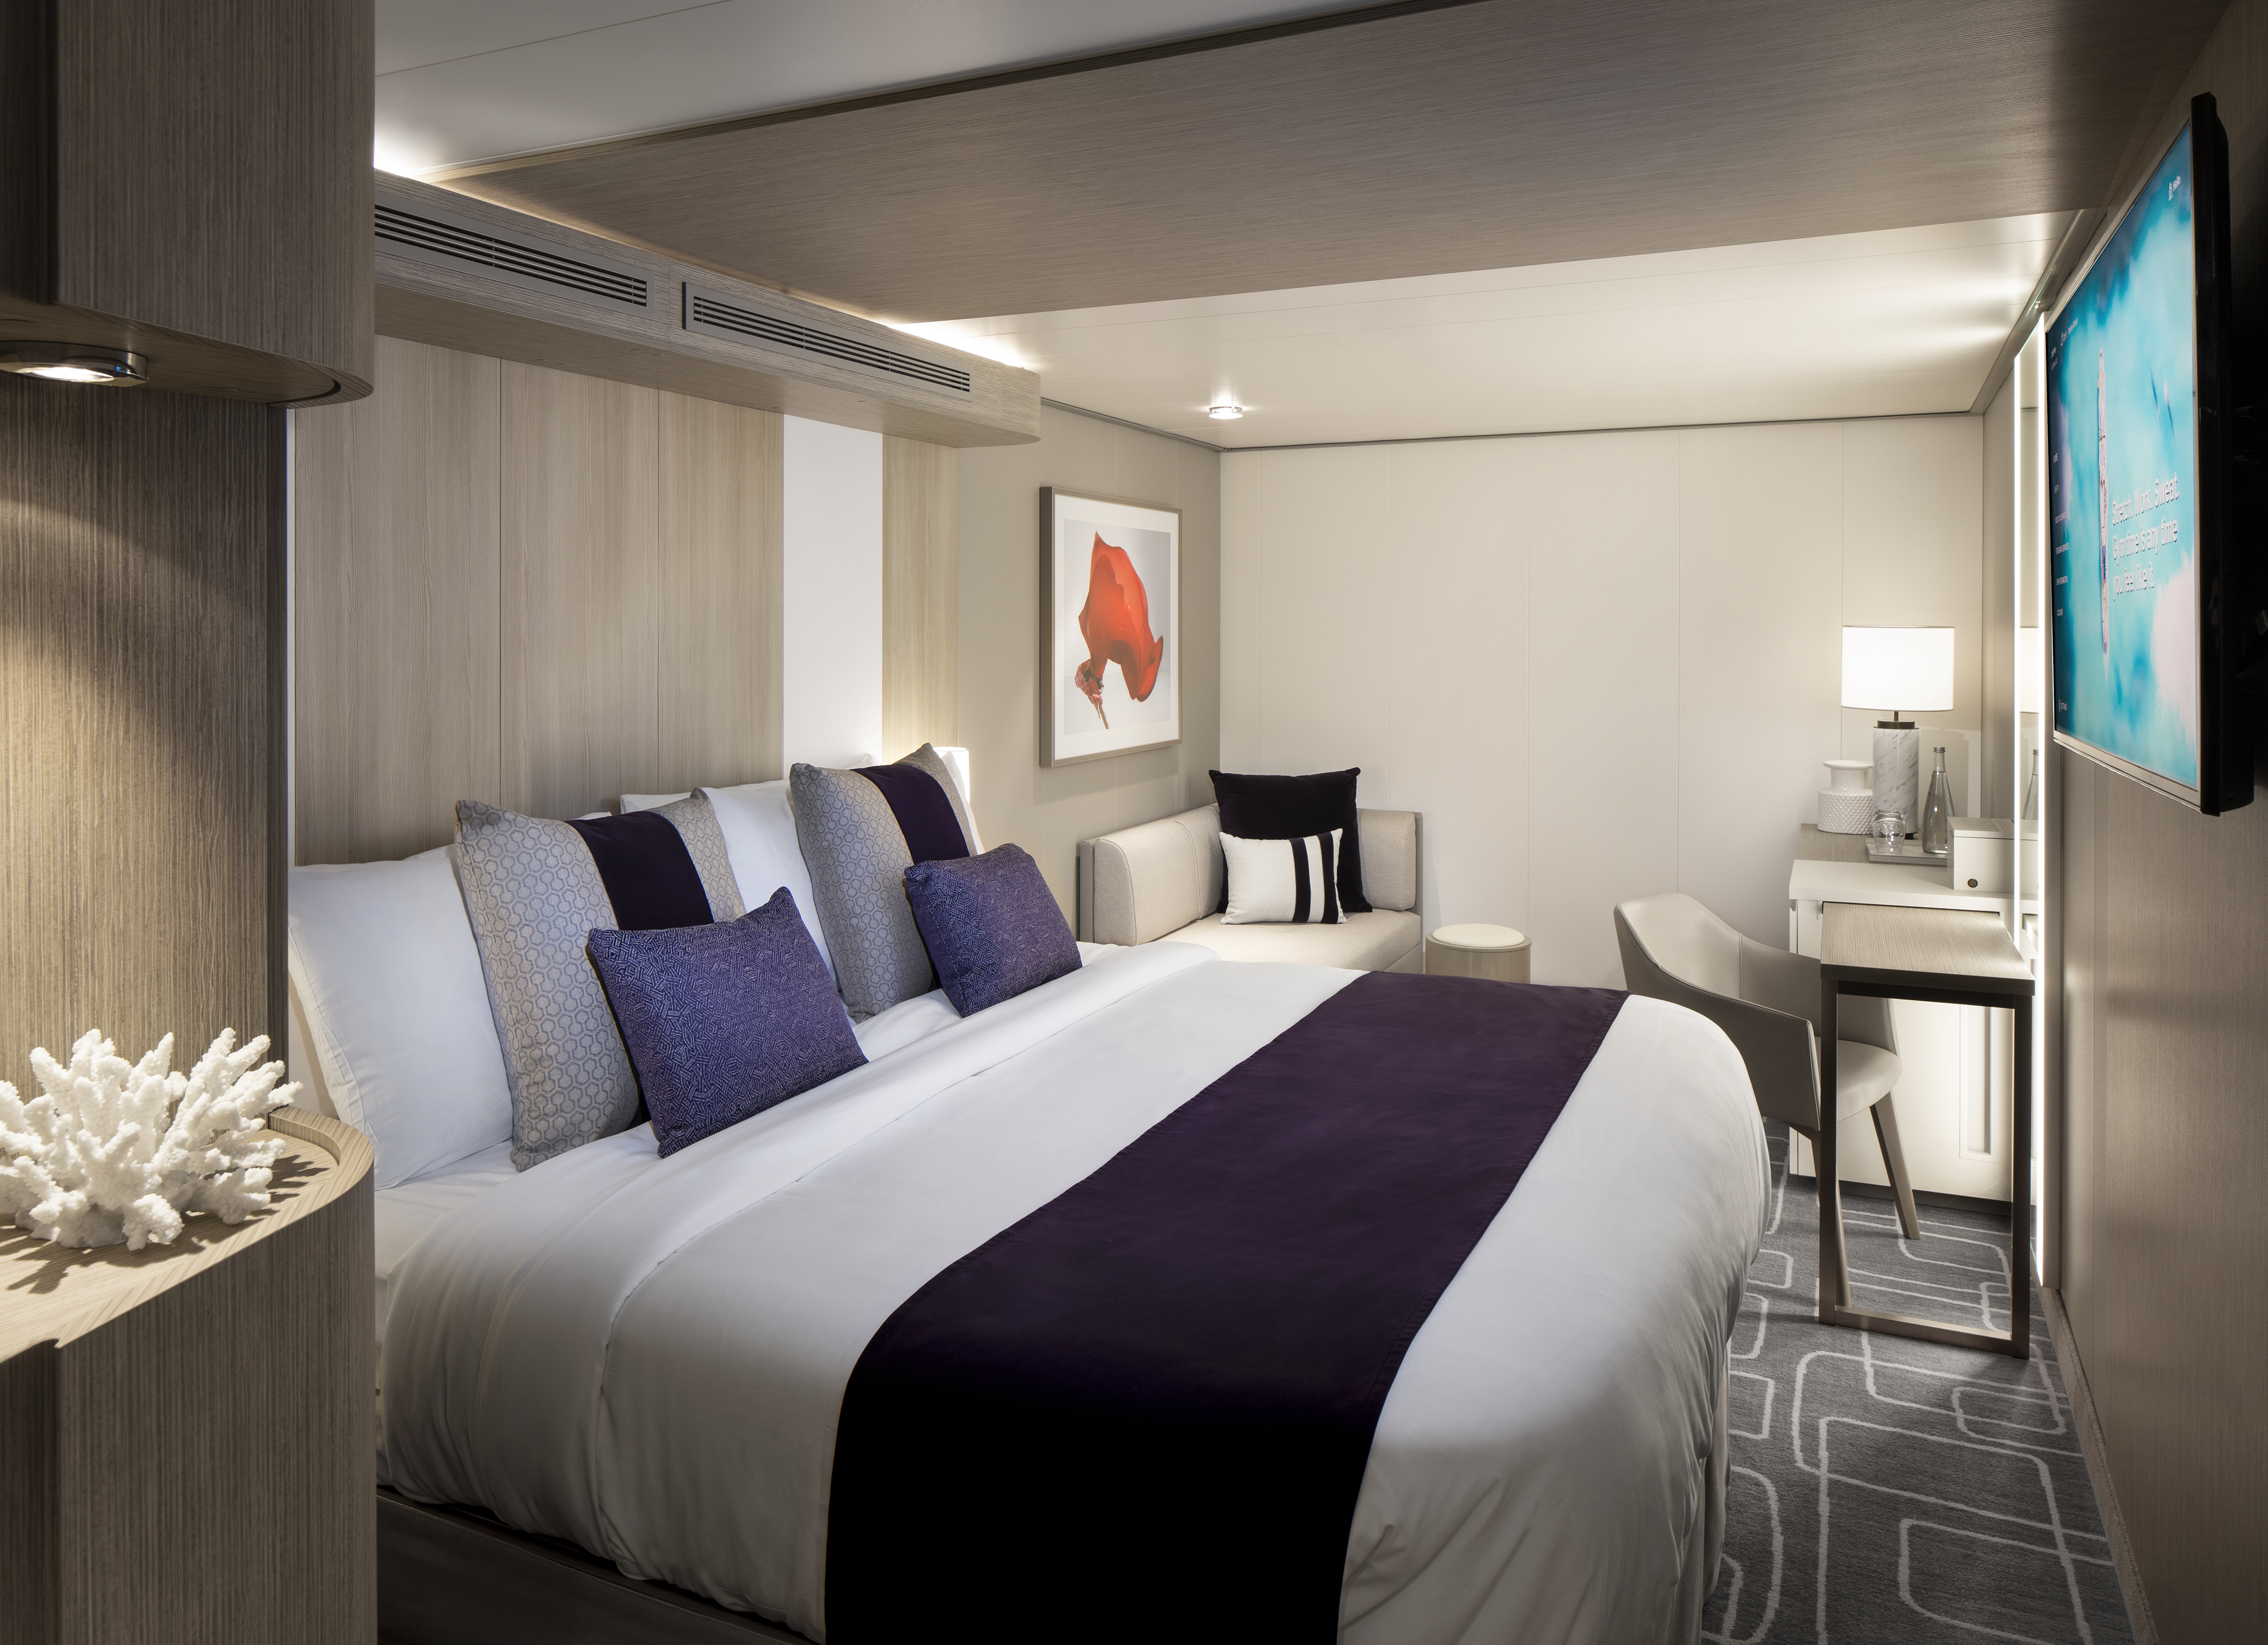 celebrity cruises disabled cabins